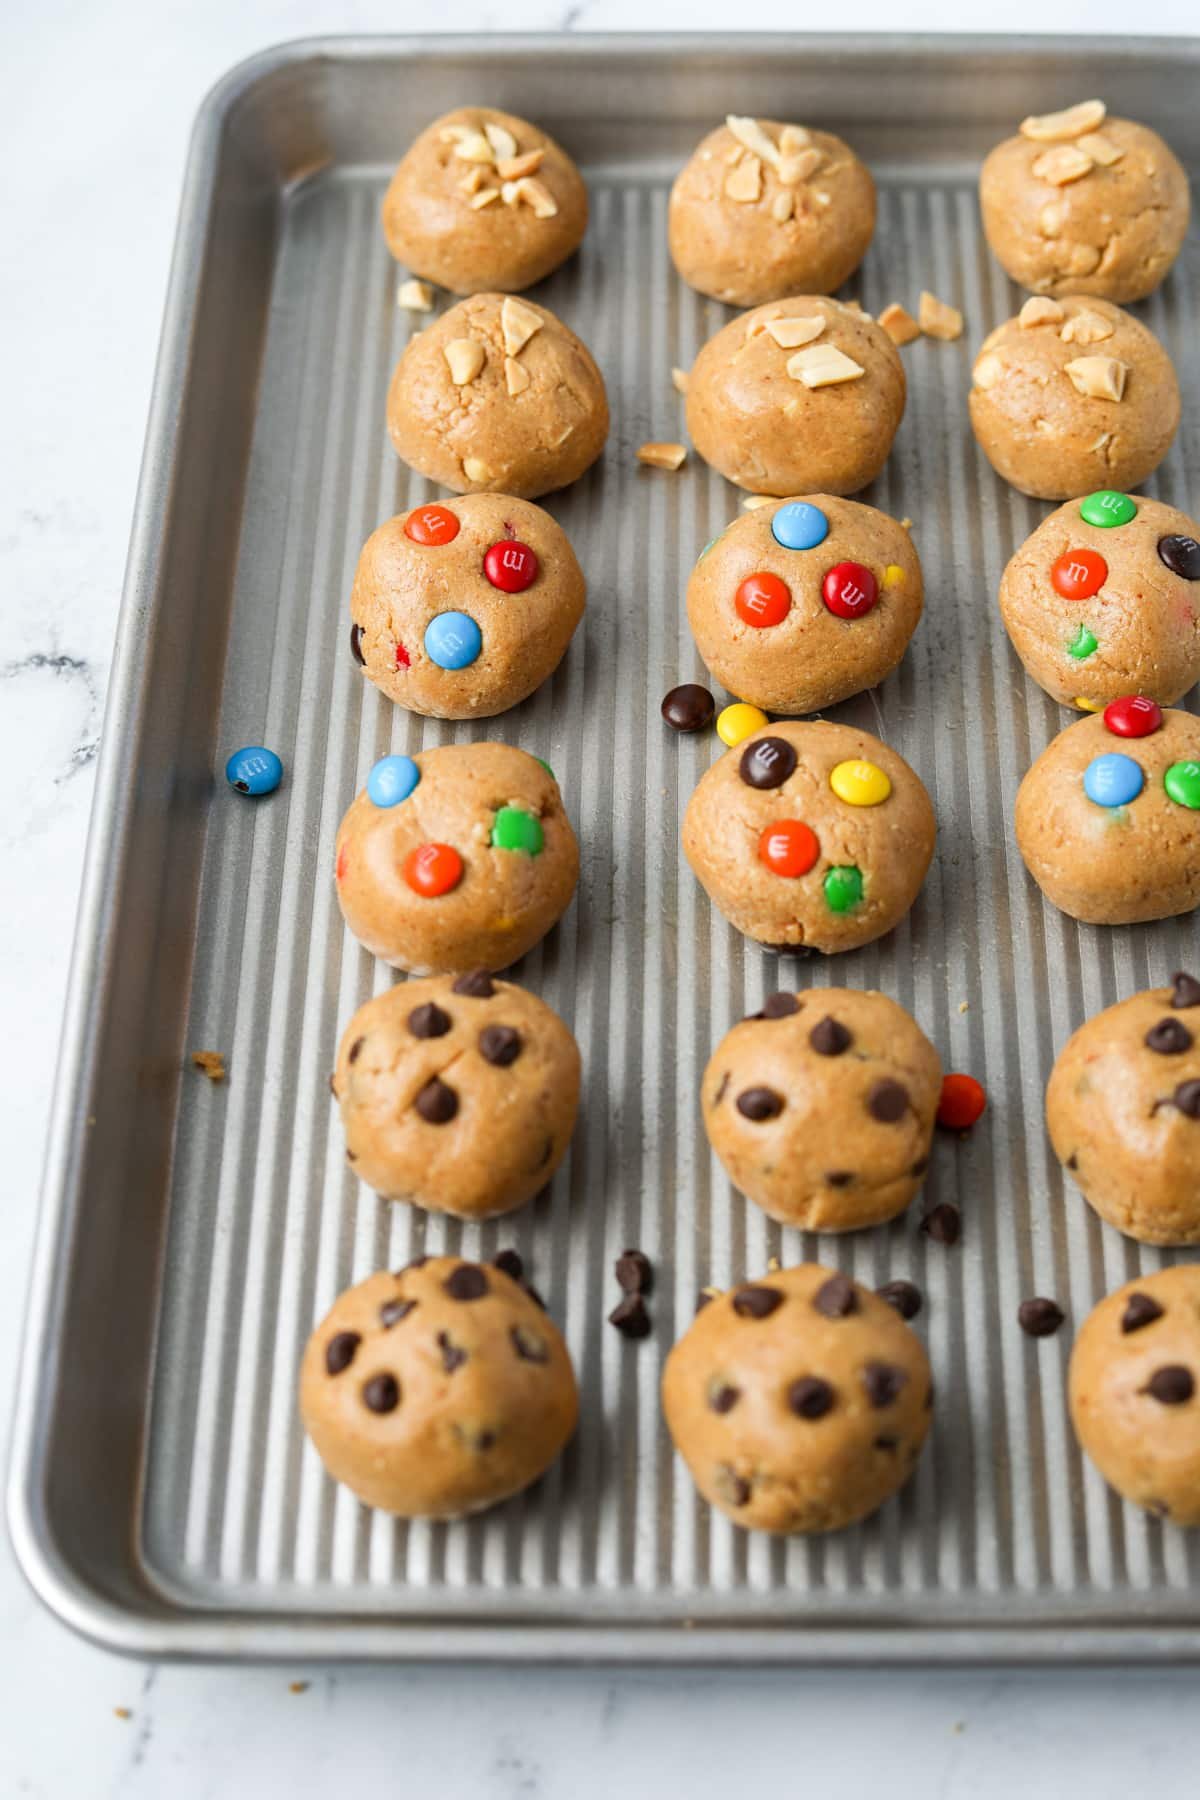 A baking tray with cookie dough balls, featuring chocolate chip, m&m, and chopped peanuts.